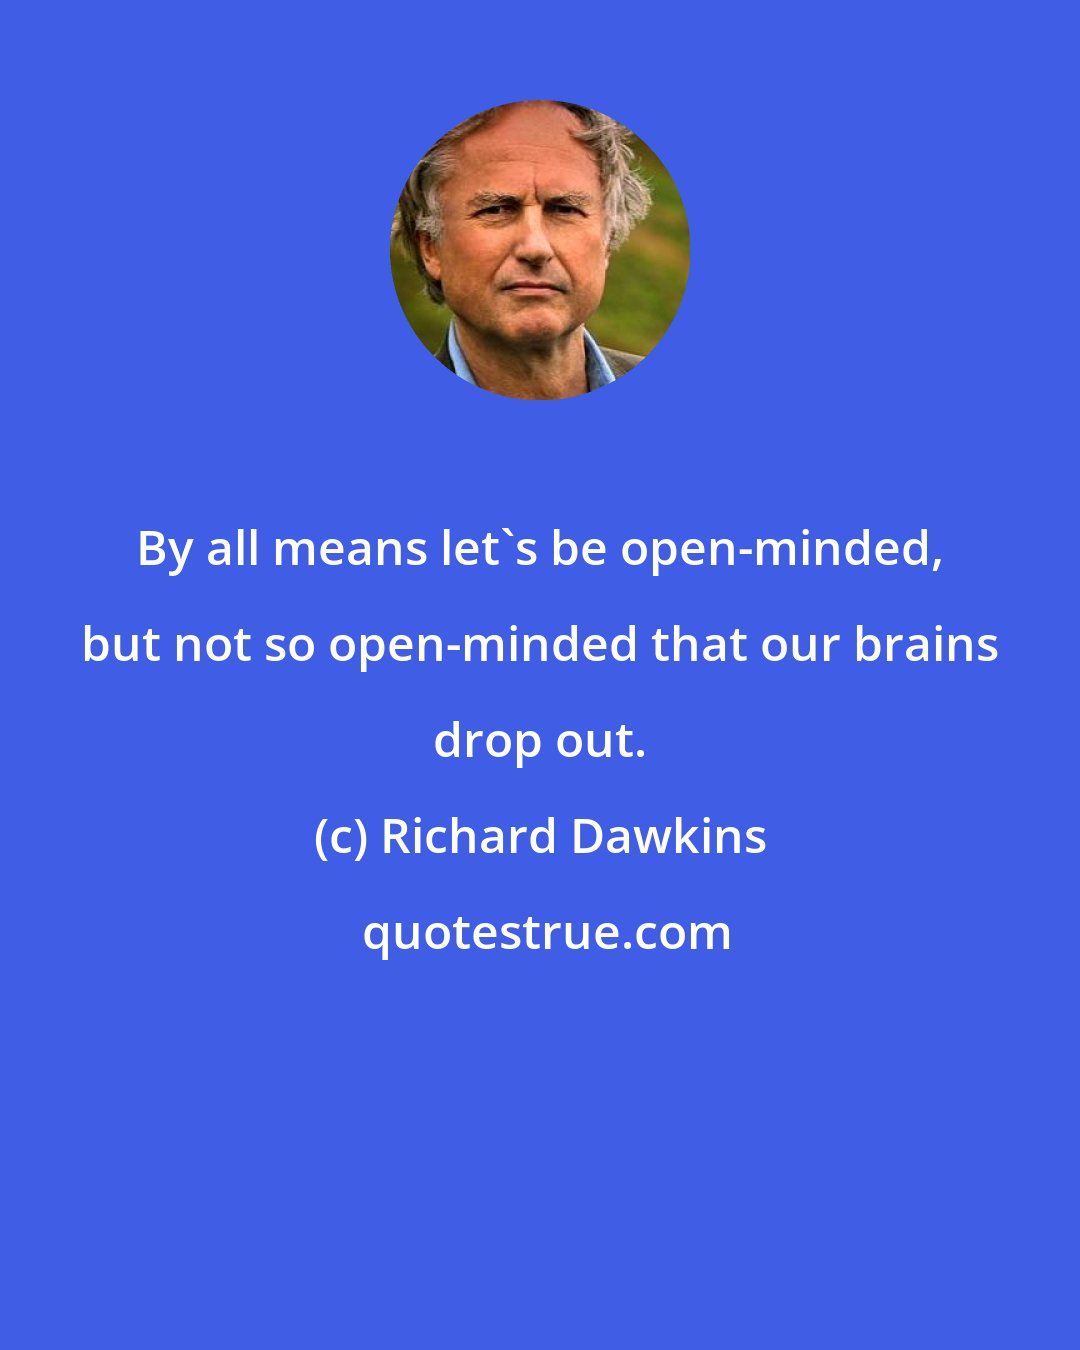 Richard Dawkins: By all means let's be open-minded, but not so open-minded that our brains drop out.